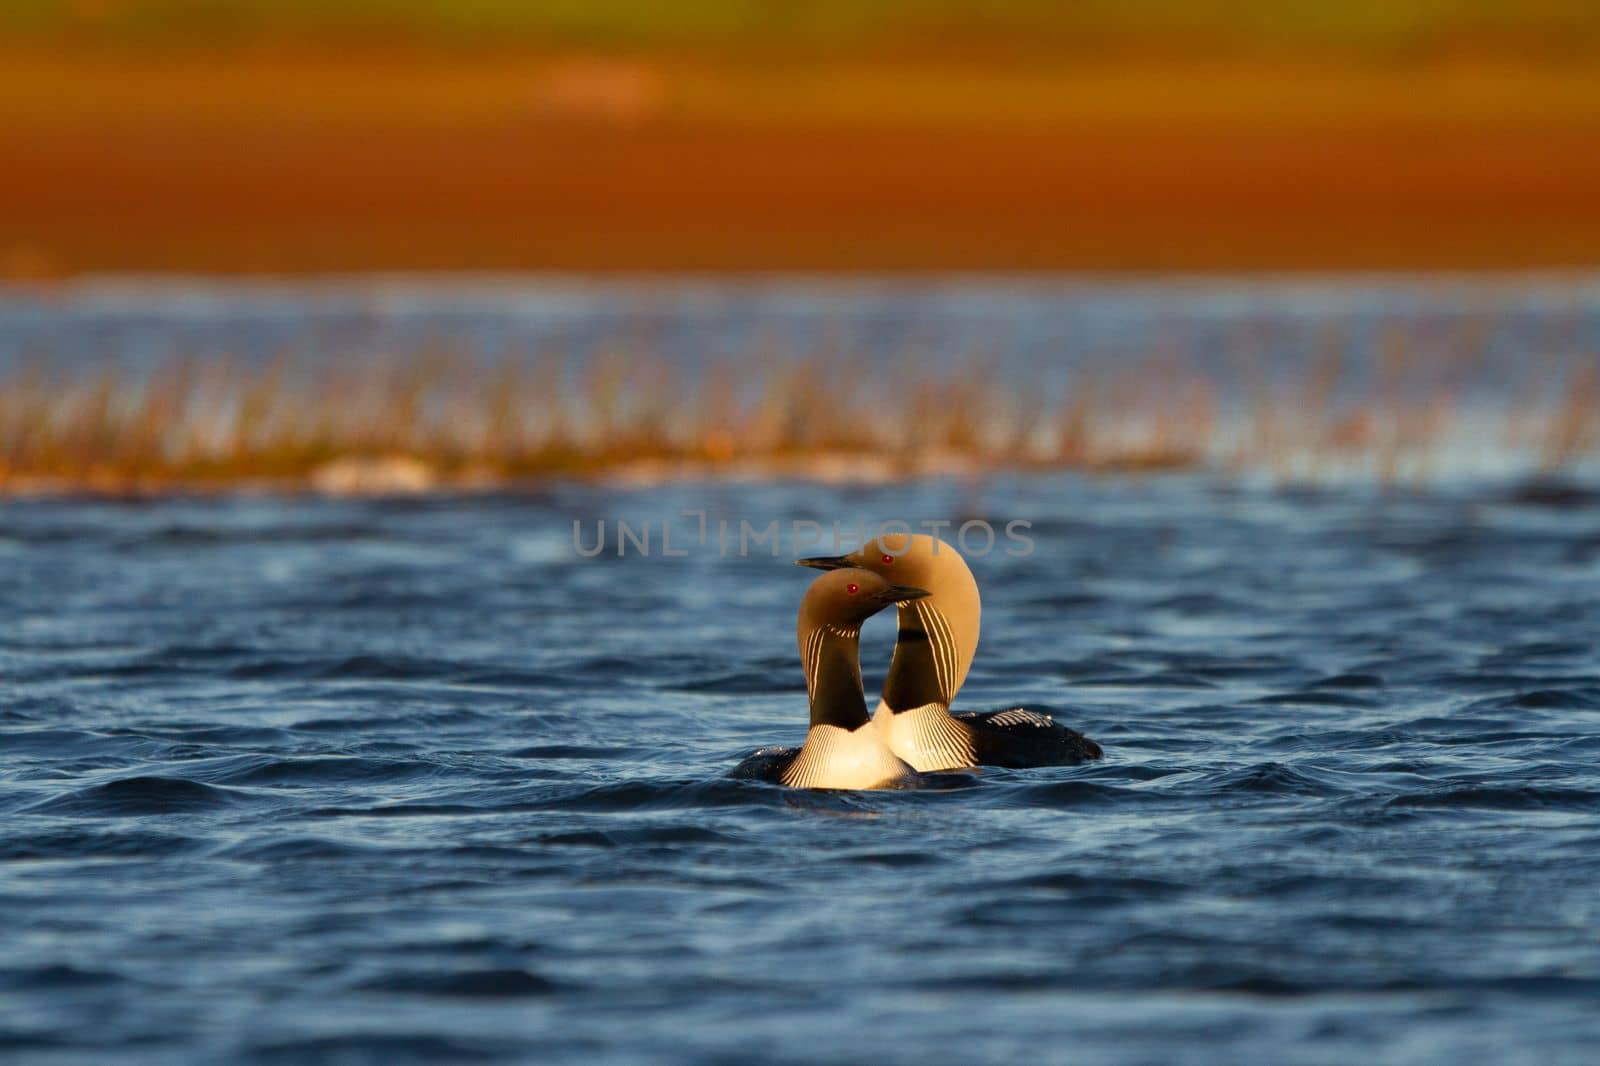 Two adult Pacific Loon or Pacific Diver swimming around in an arctic lake with willows in the background, Arviat Nunavut